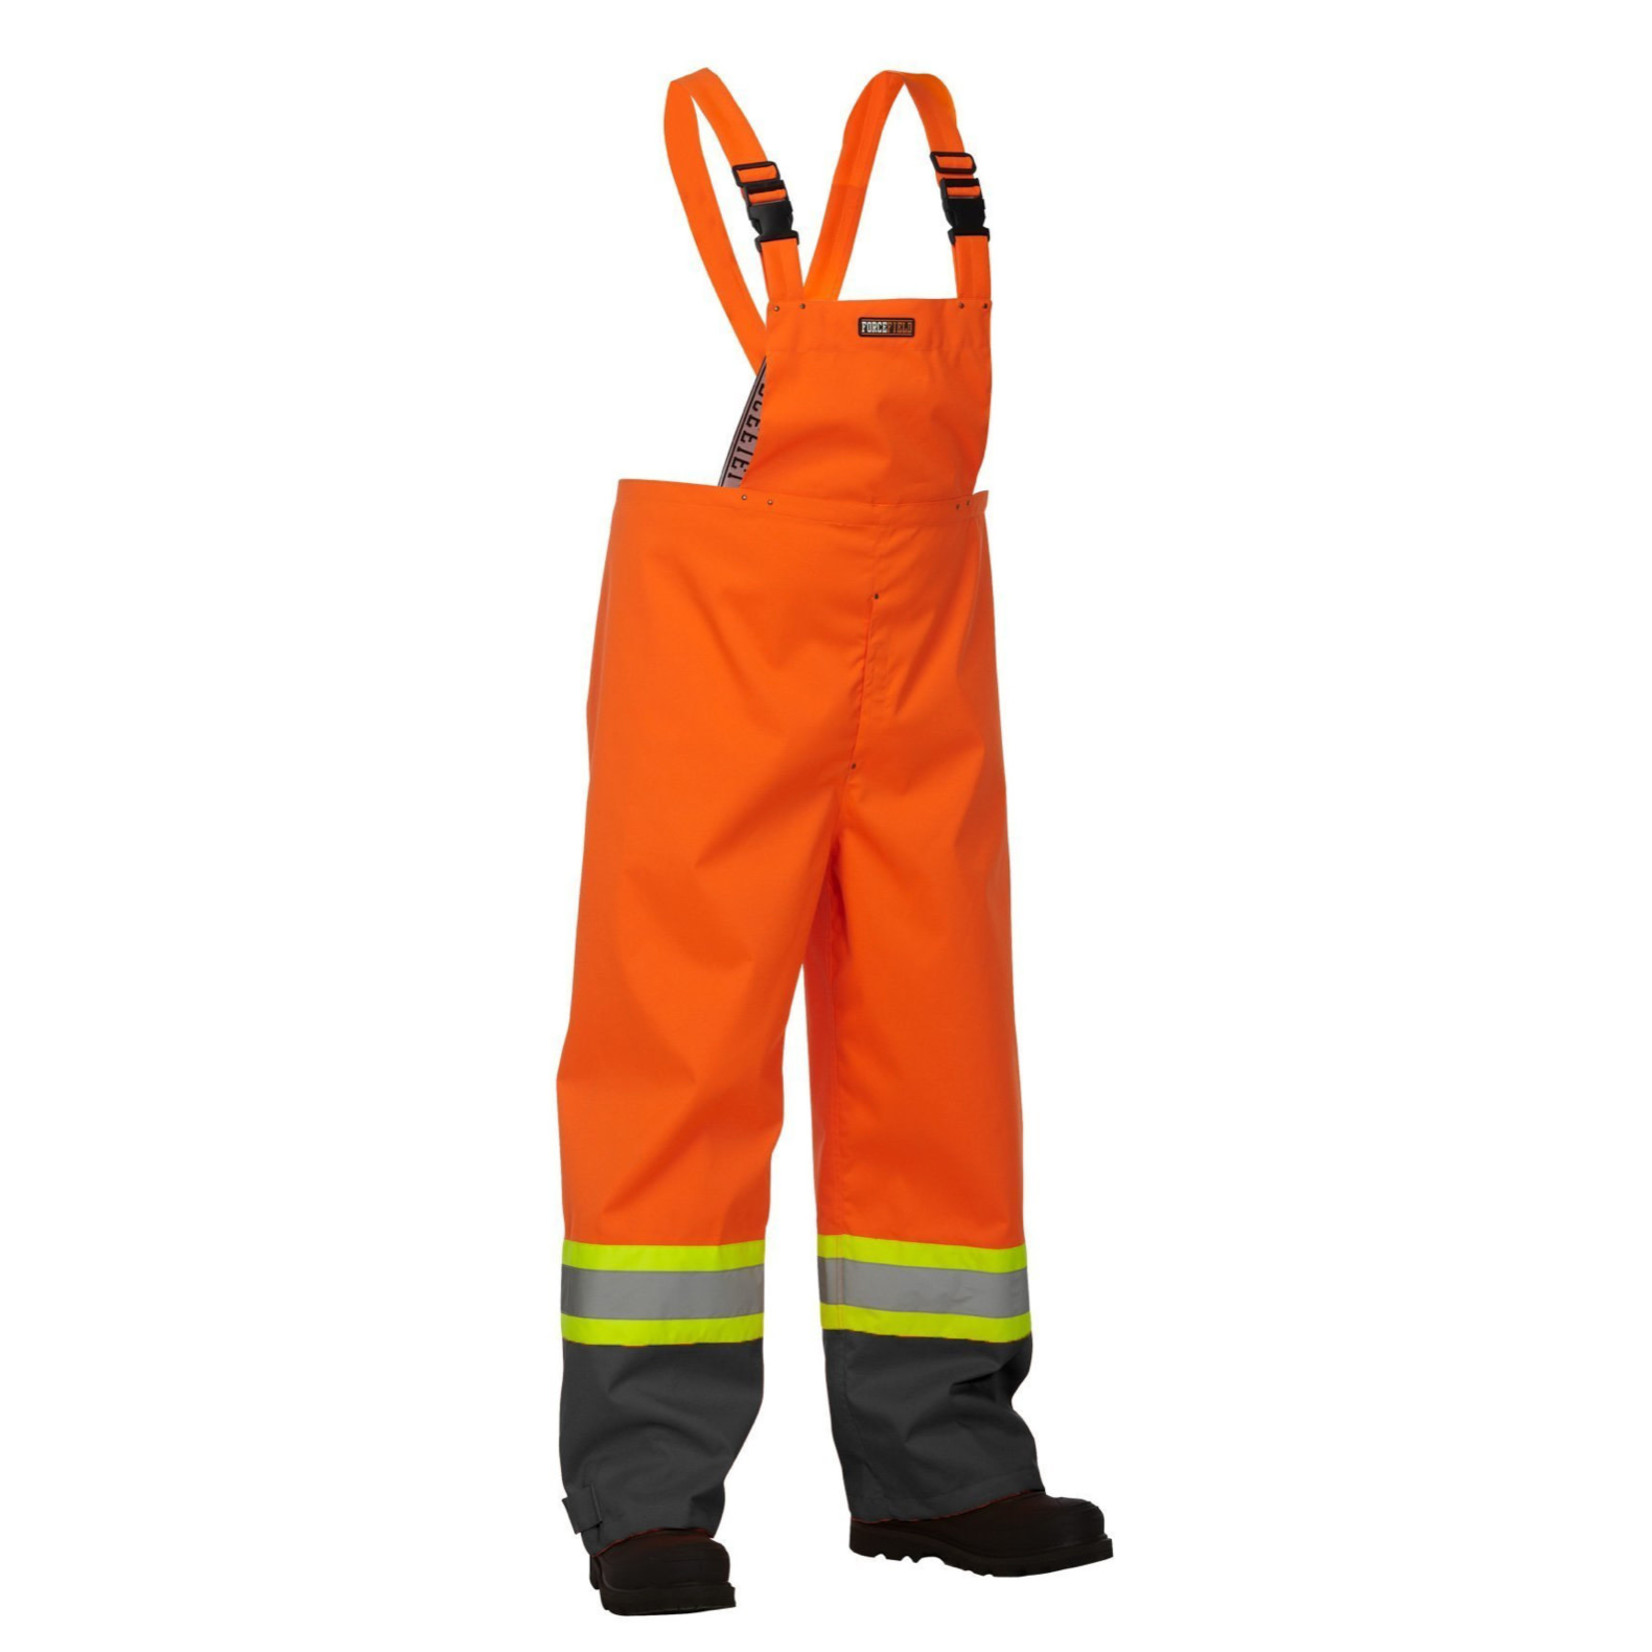 Forcefield Hi Vis Safety Rain Overall